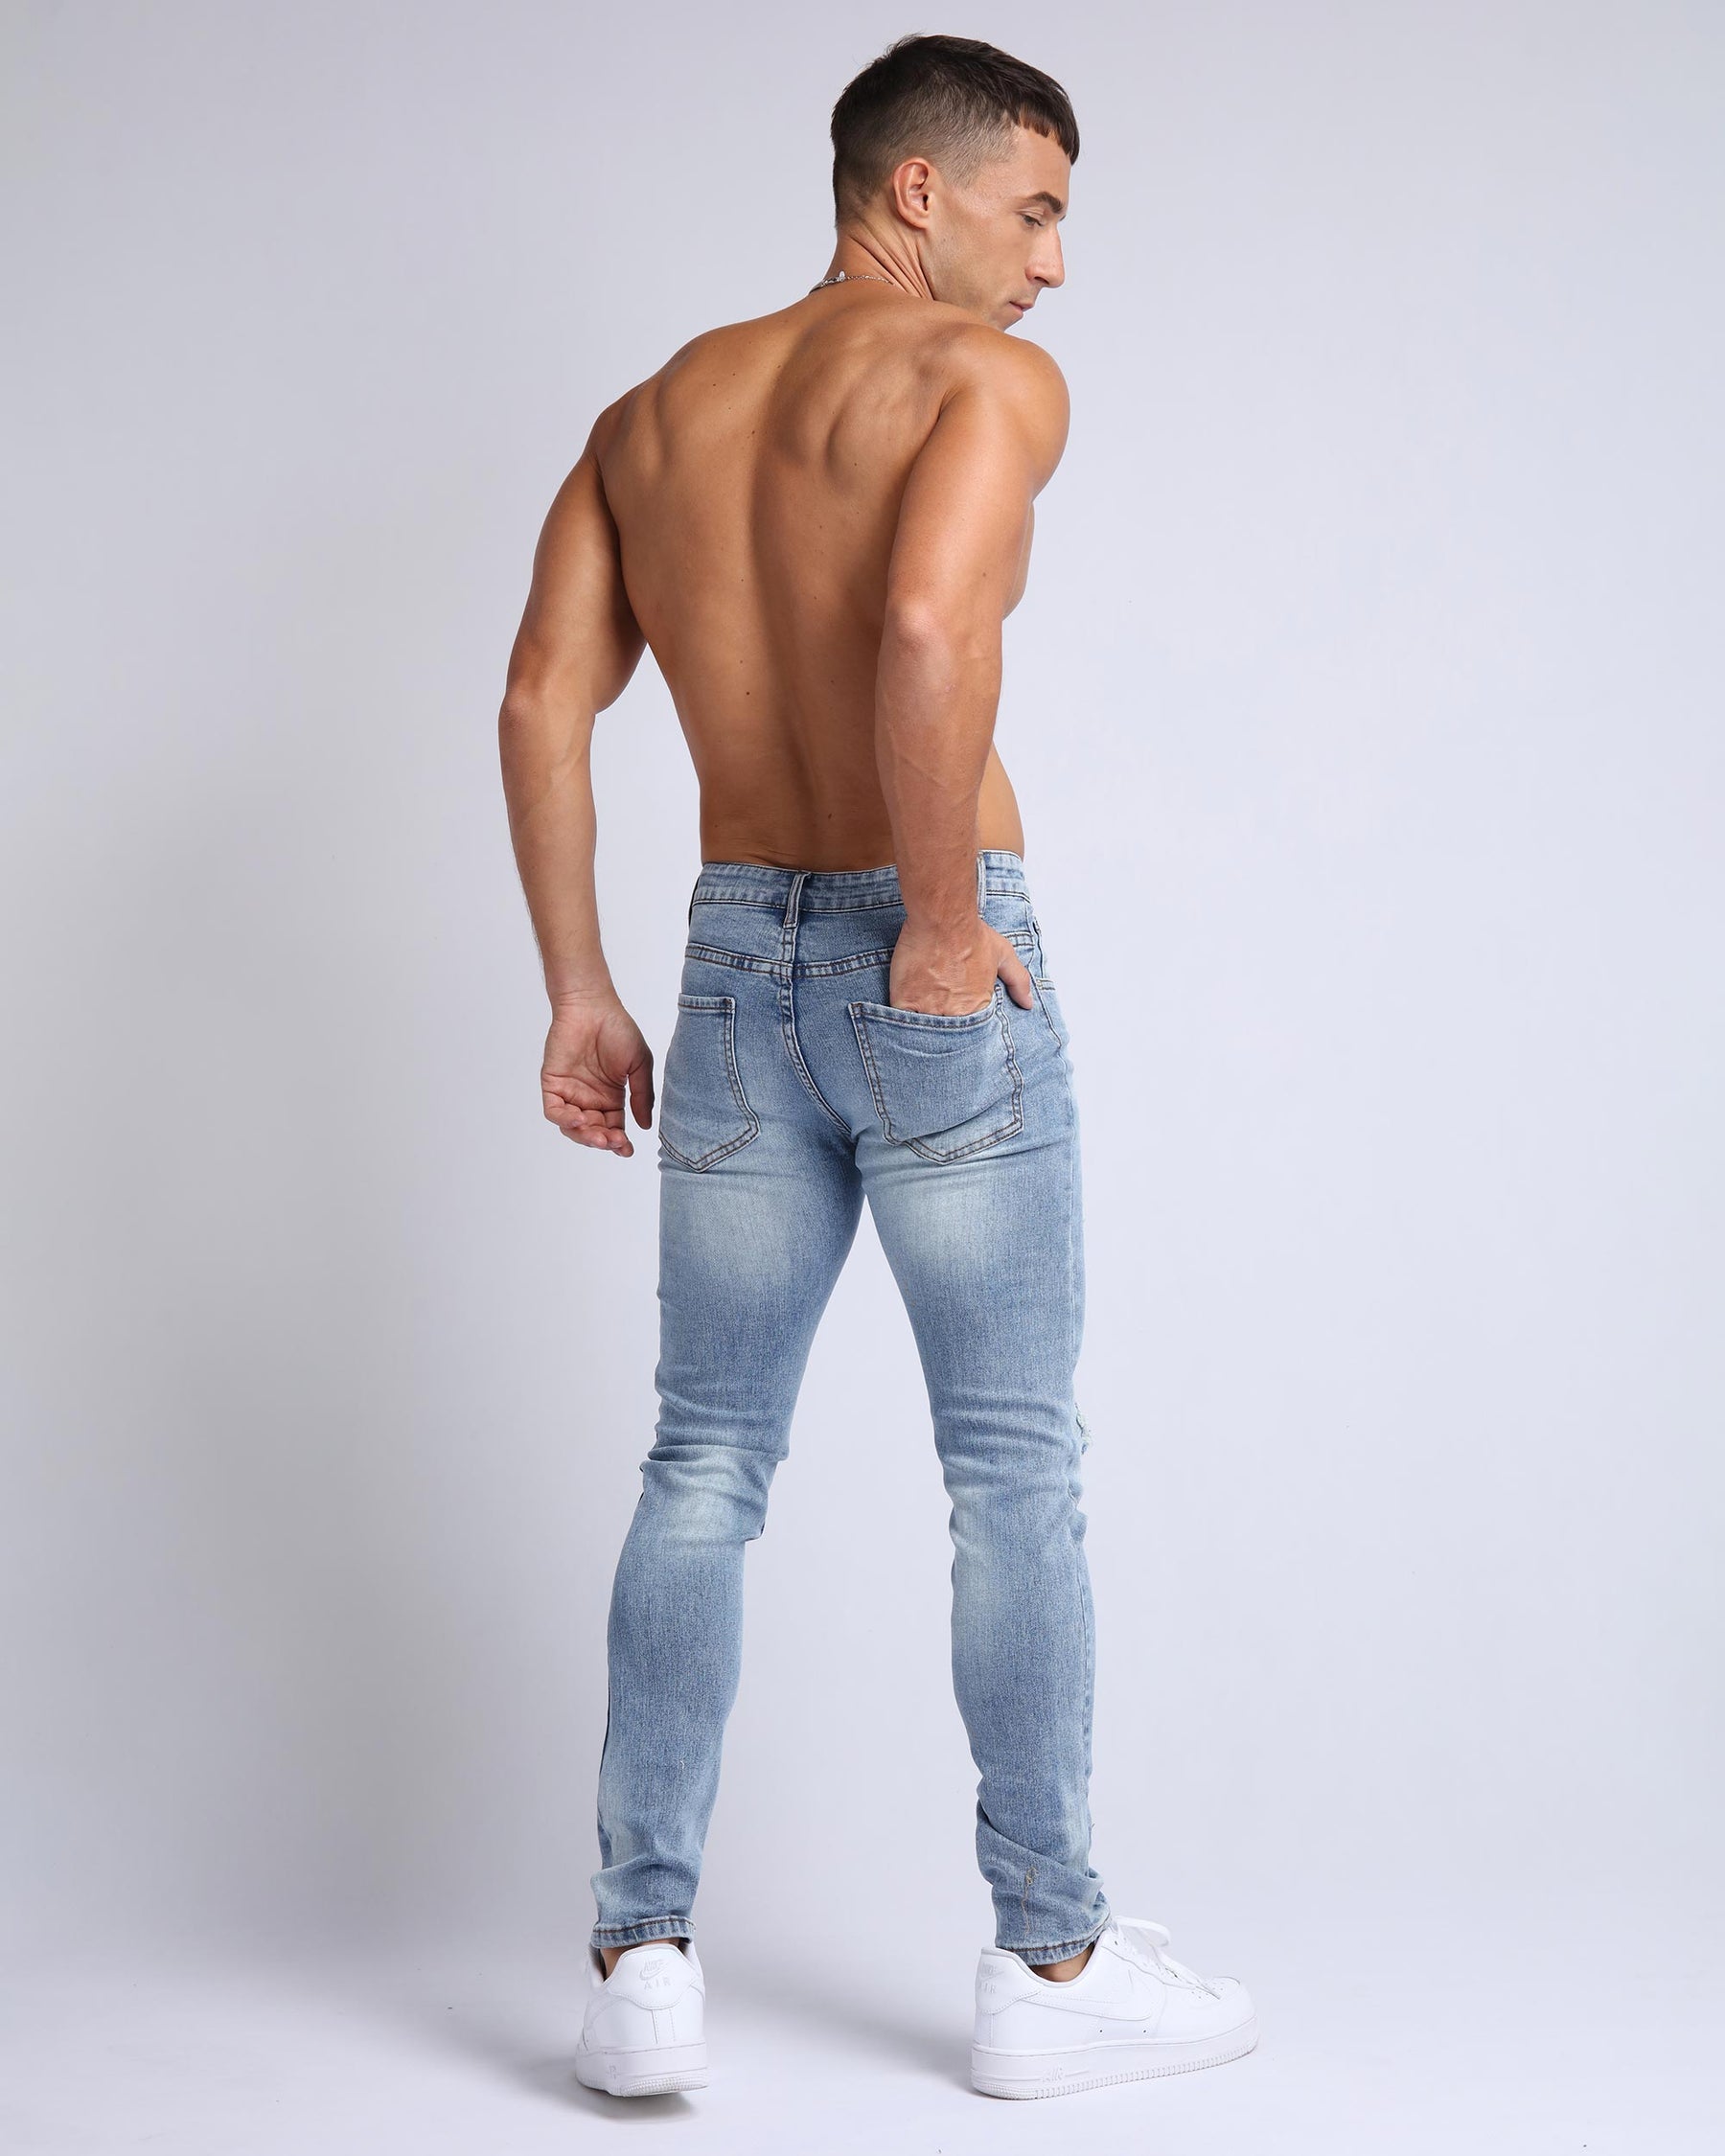 LOGEQI Light Wash Blue Ripped Jeans